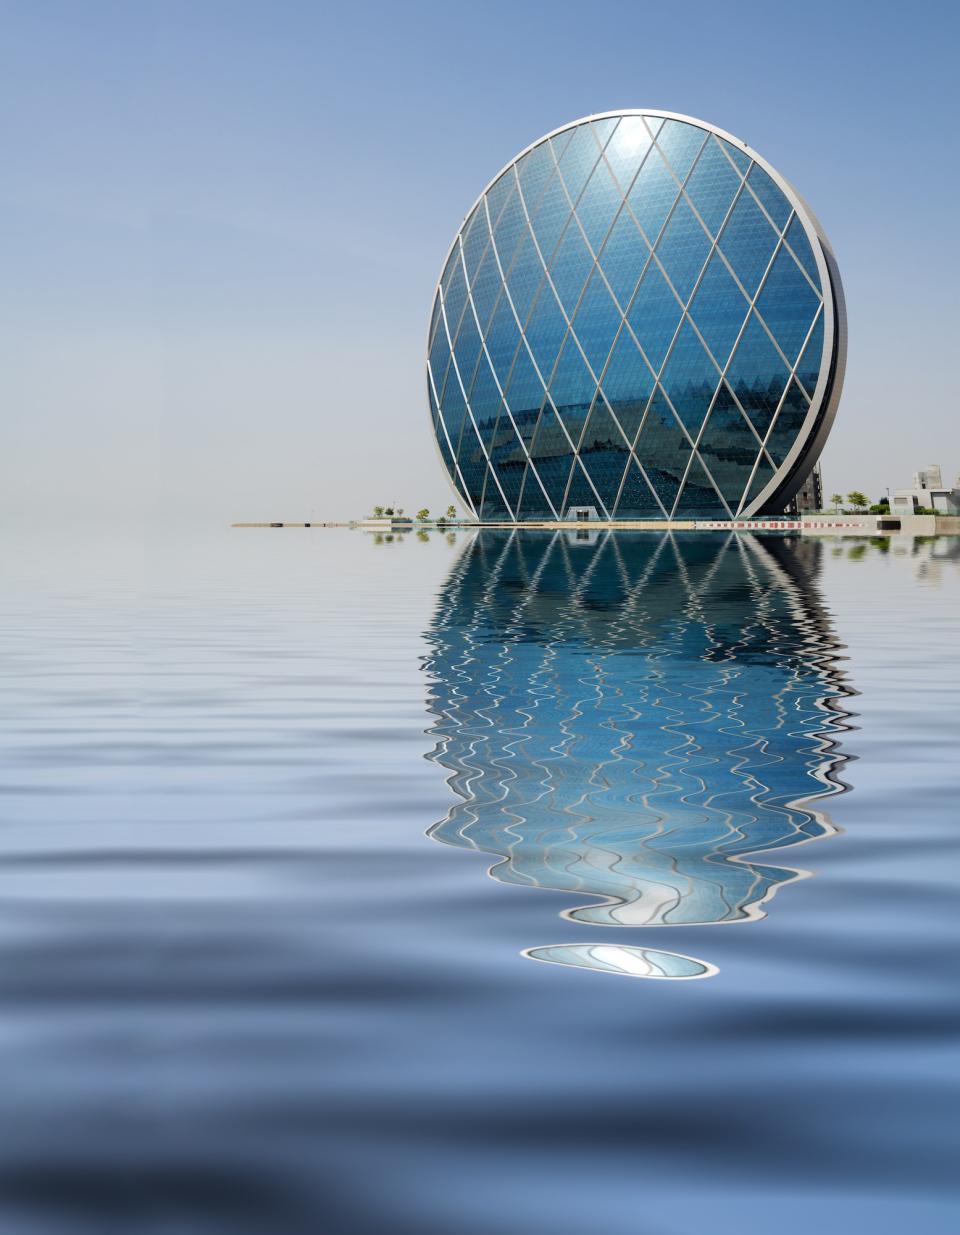 Located in Abu Dhabi, UAE, and designed by the Lebanese-based firm MZ Architects, the Aldar headquarters building was opened in 2010.